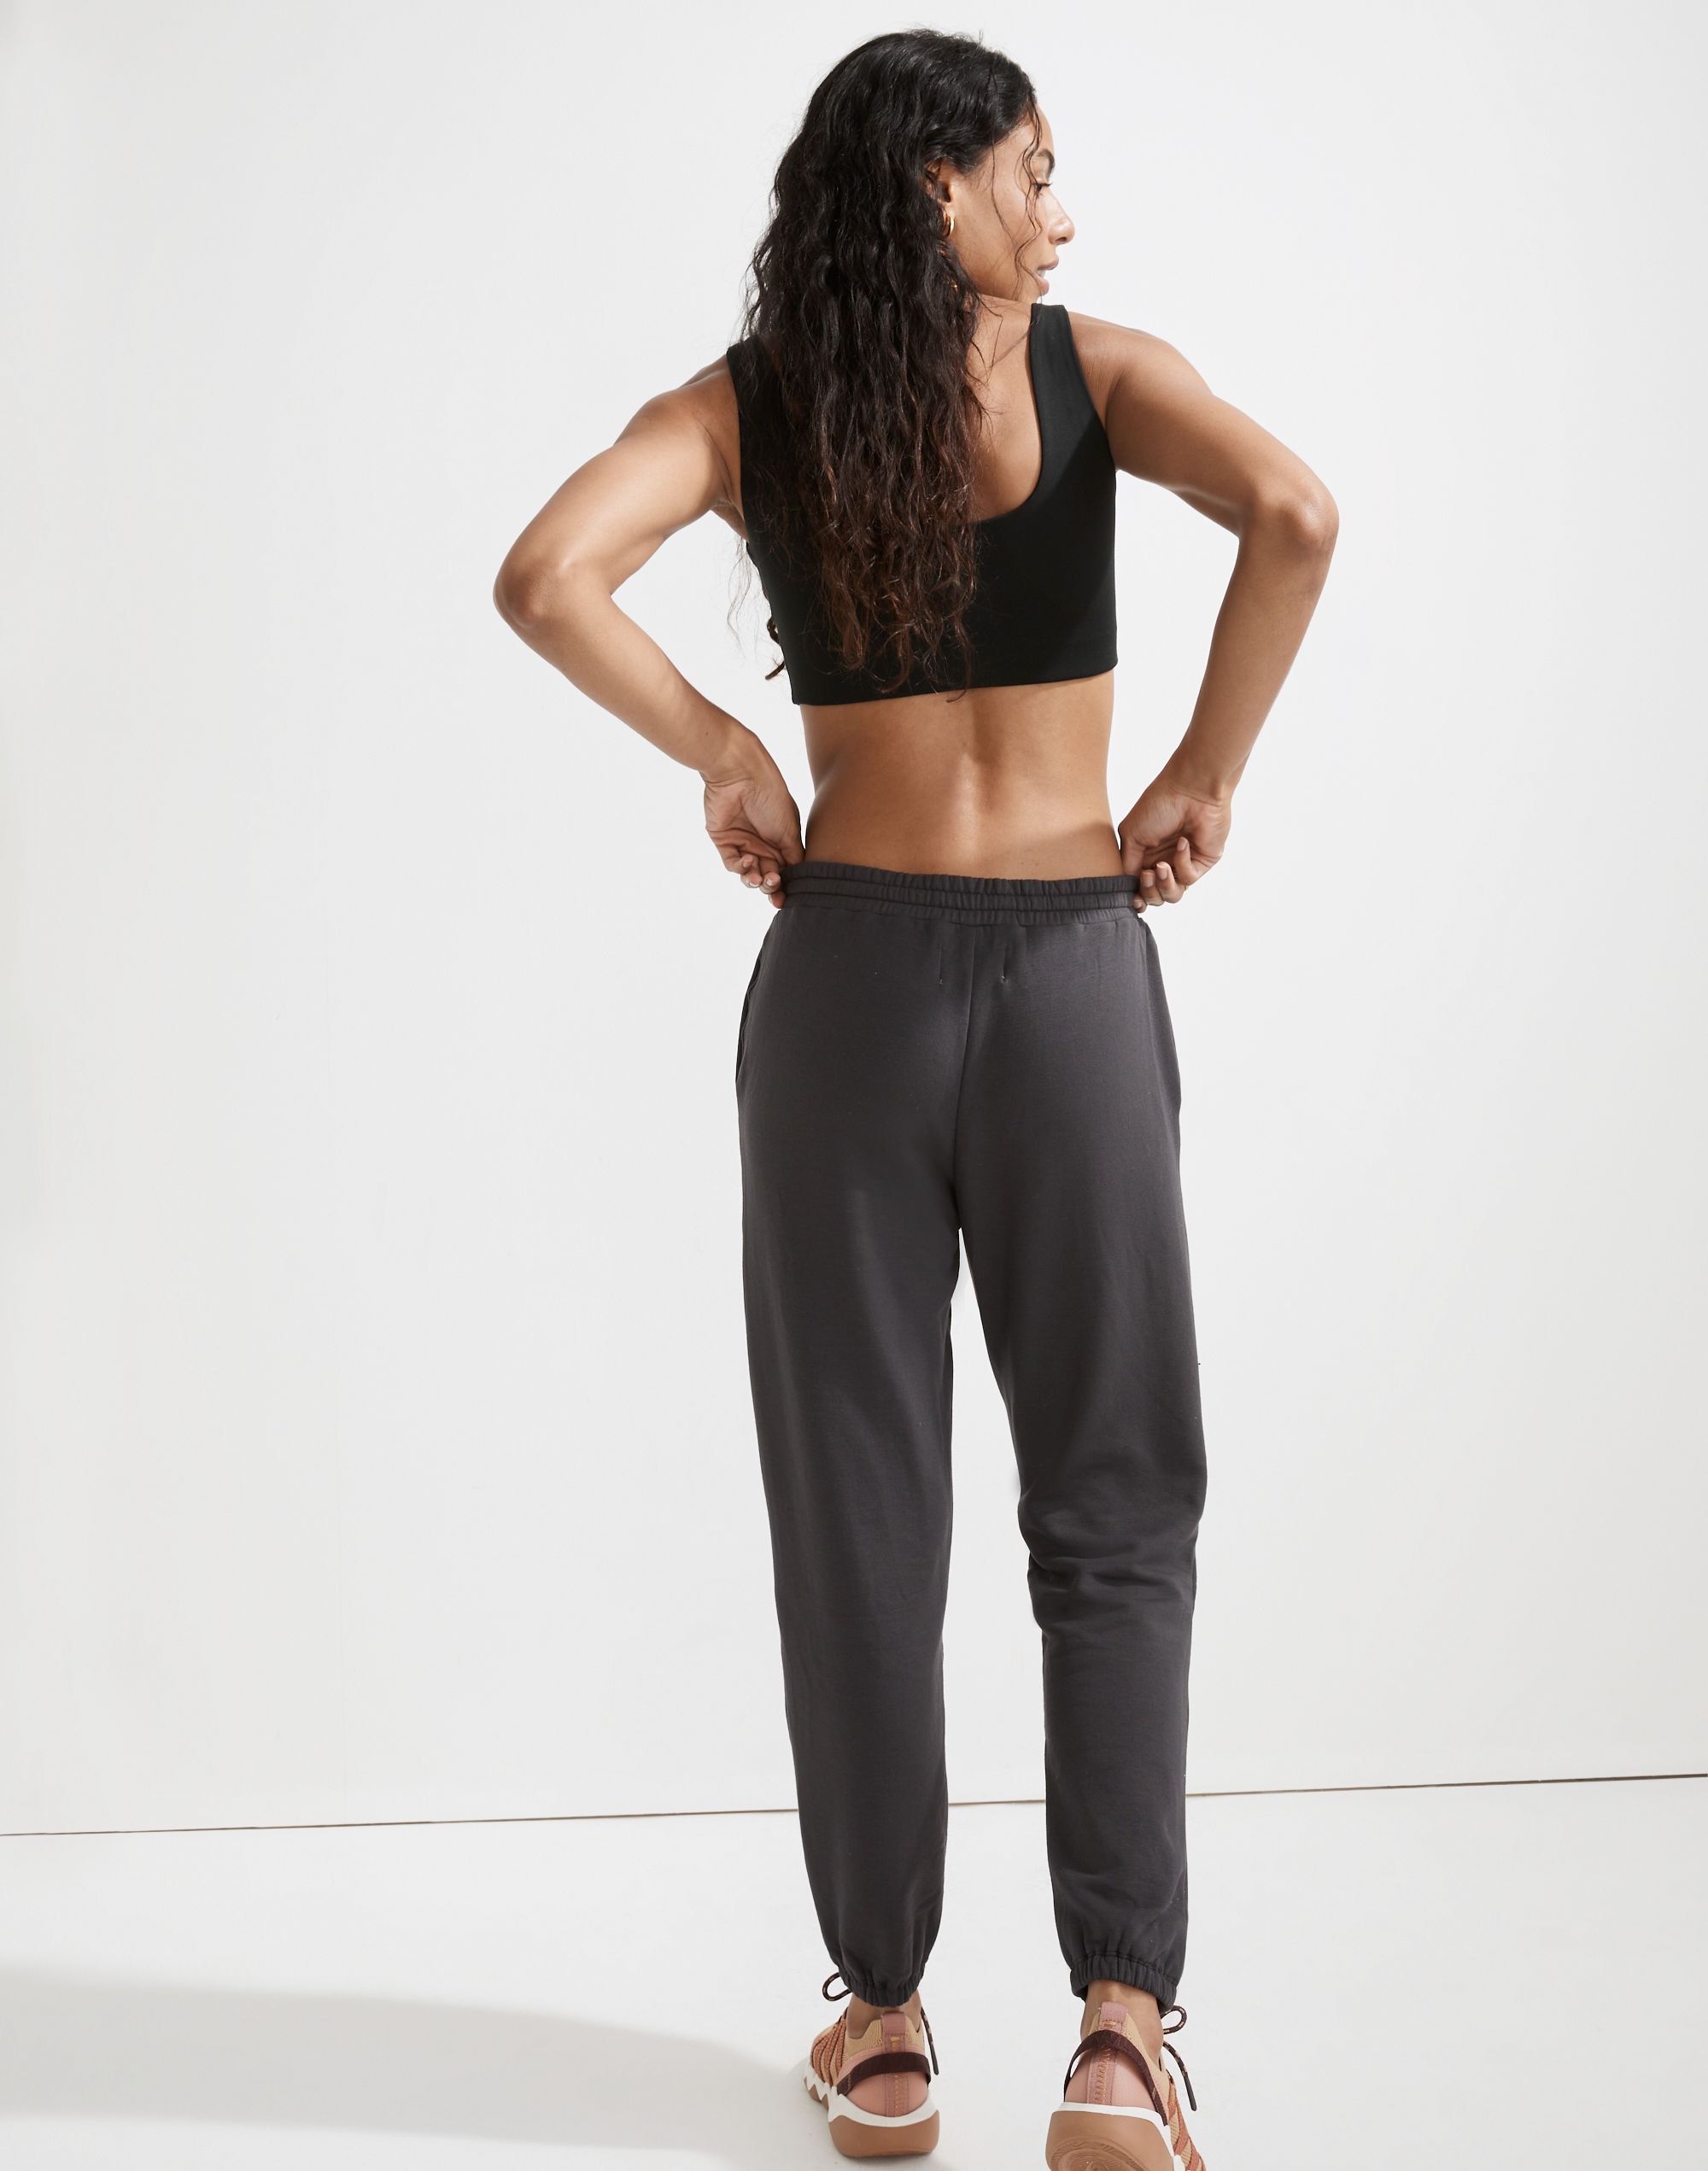 Superbrushed Easygoing Sweatpants